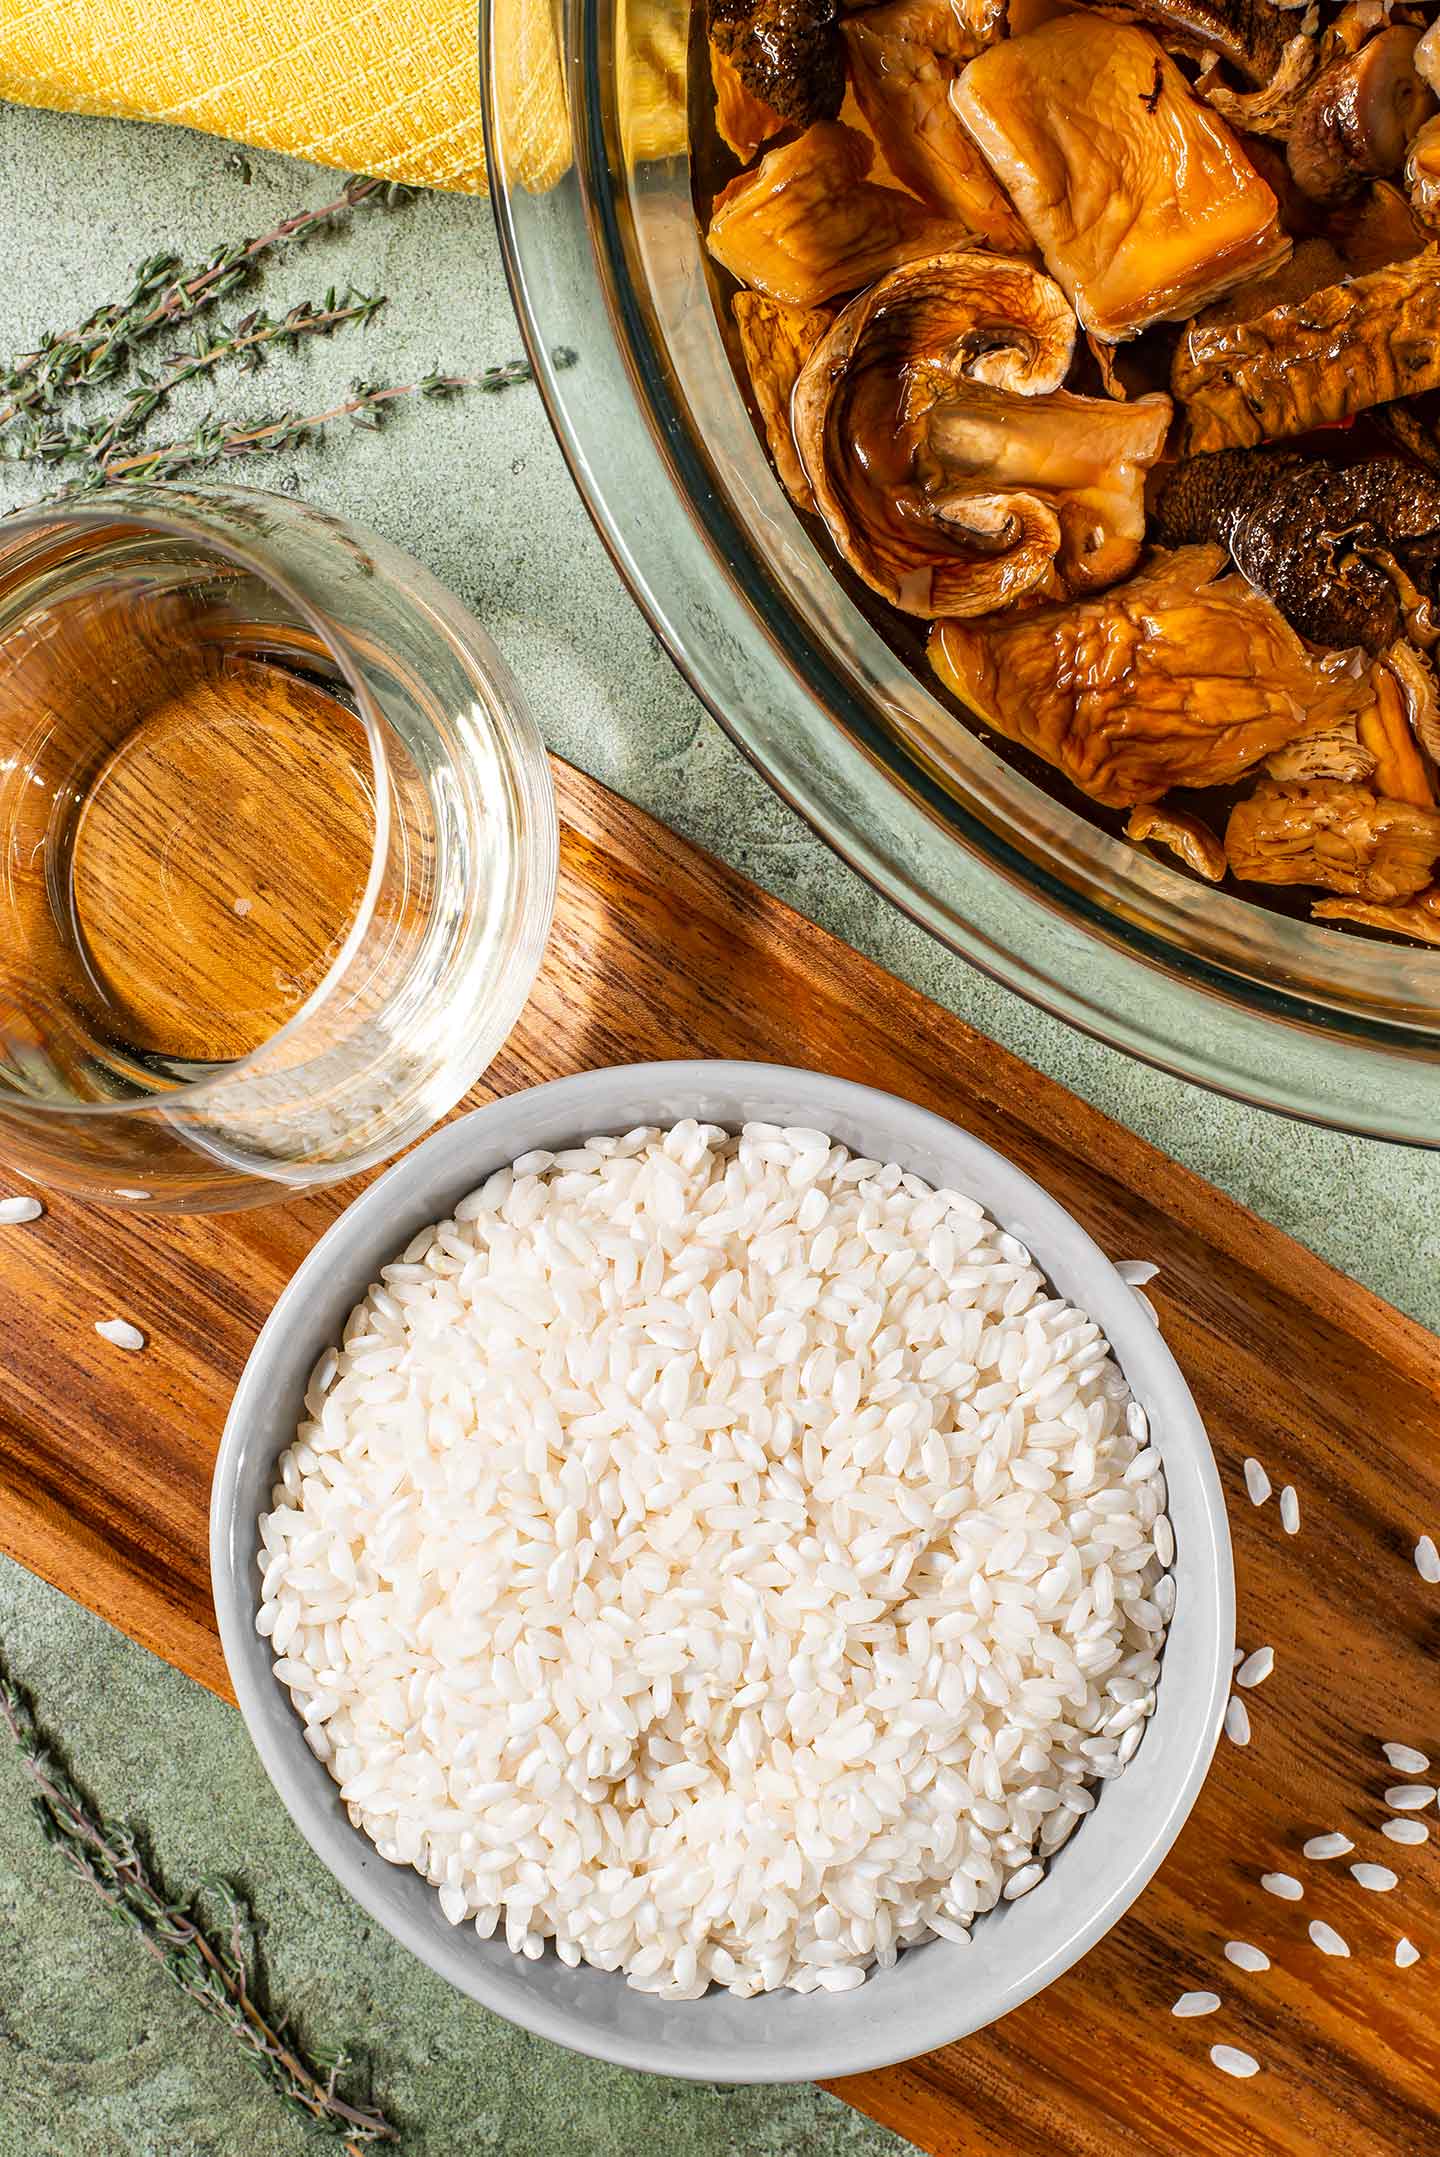 Top down view of arborio rice in a small dish with a glass of white wine nearby and a bowl of dried wild mushrooms rehydrating in water.